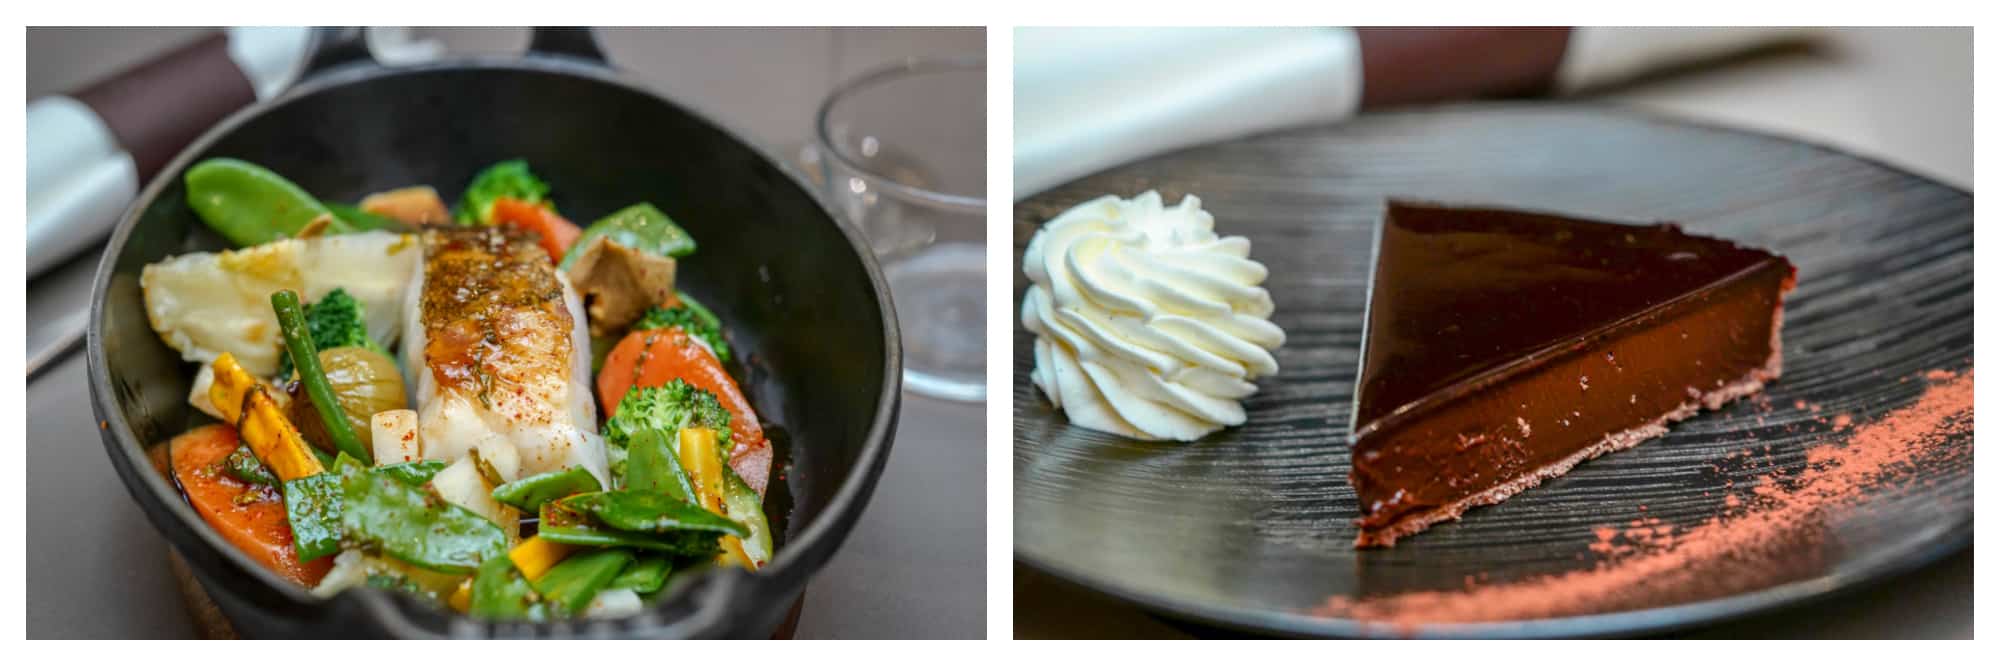 On the left, Les Cocottes in Paris offers seared fish with spring vegetables. On the right, the restaurant's creamy chocolate torte.